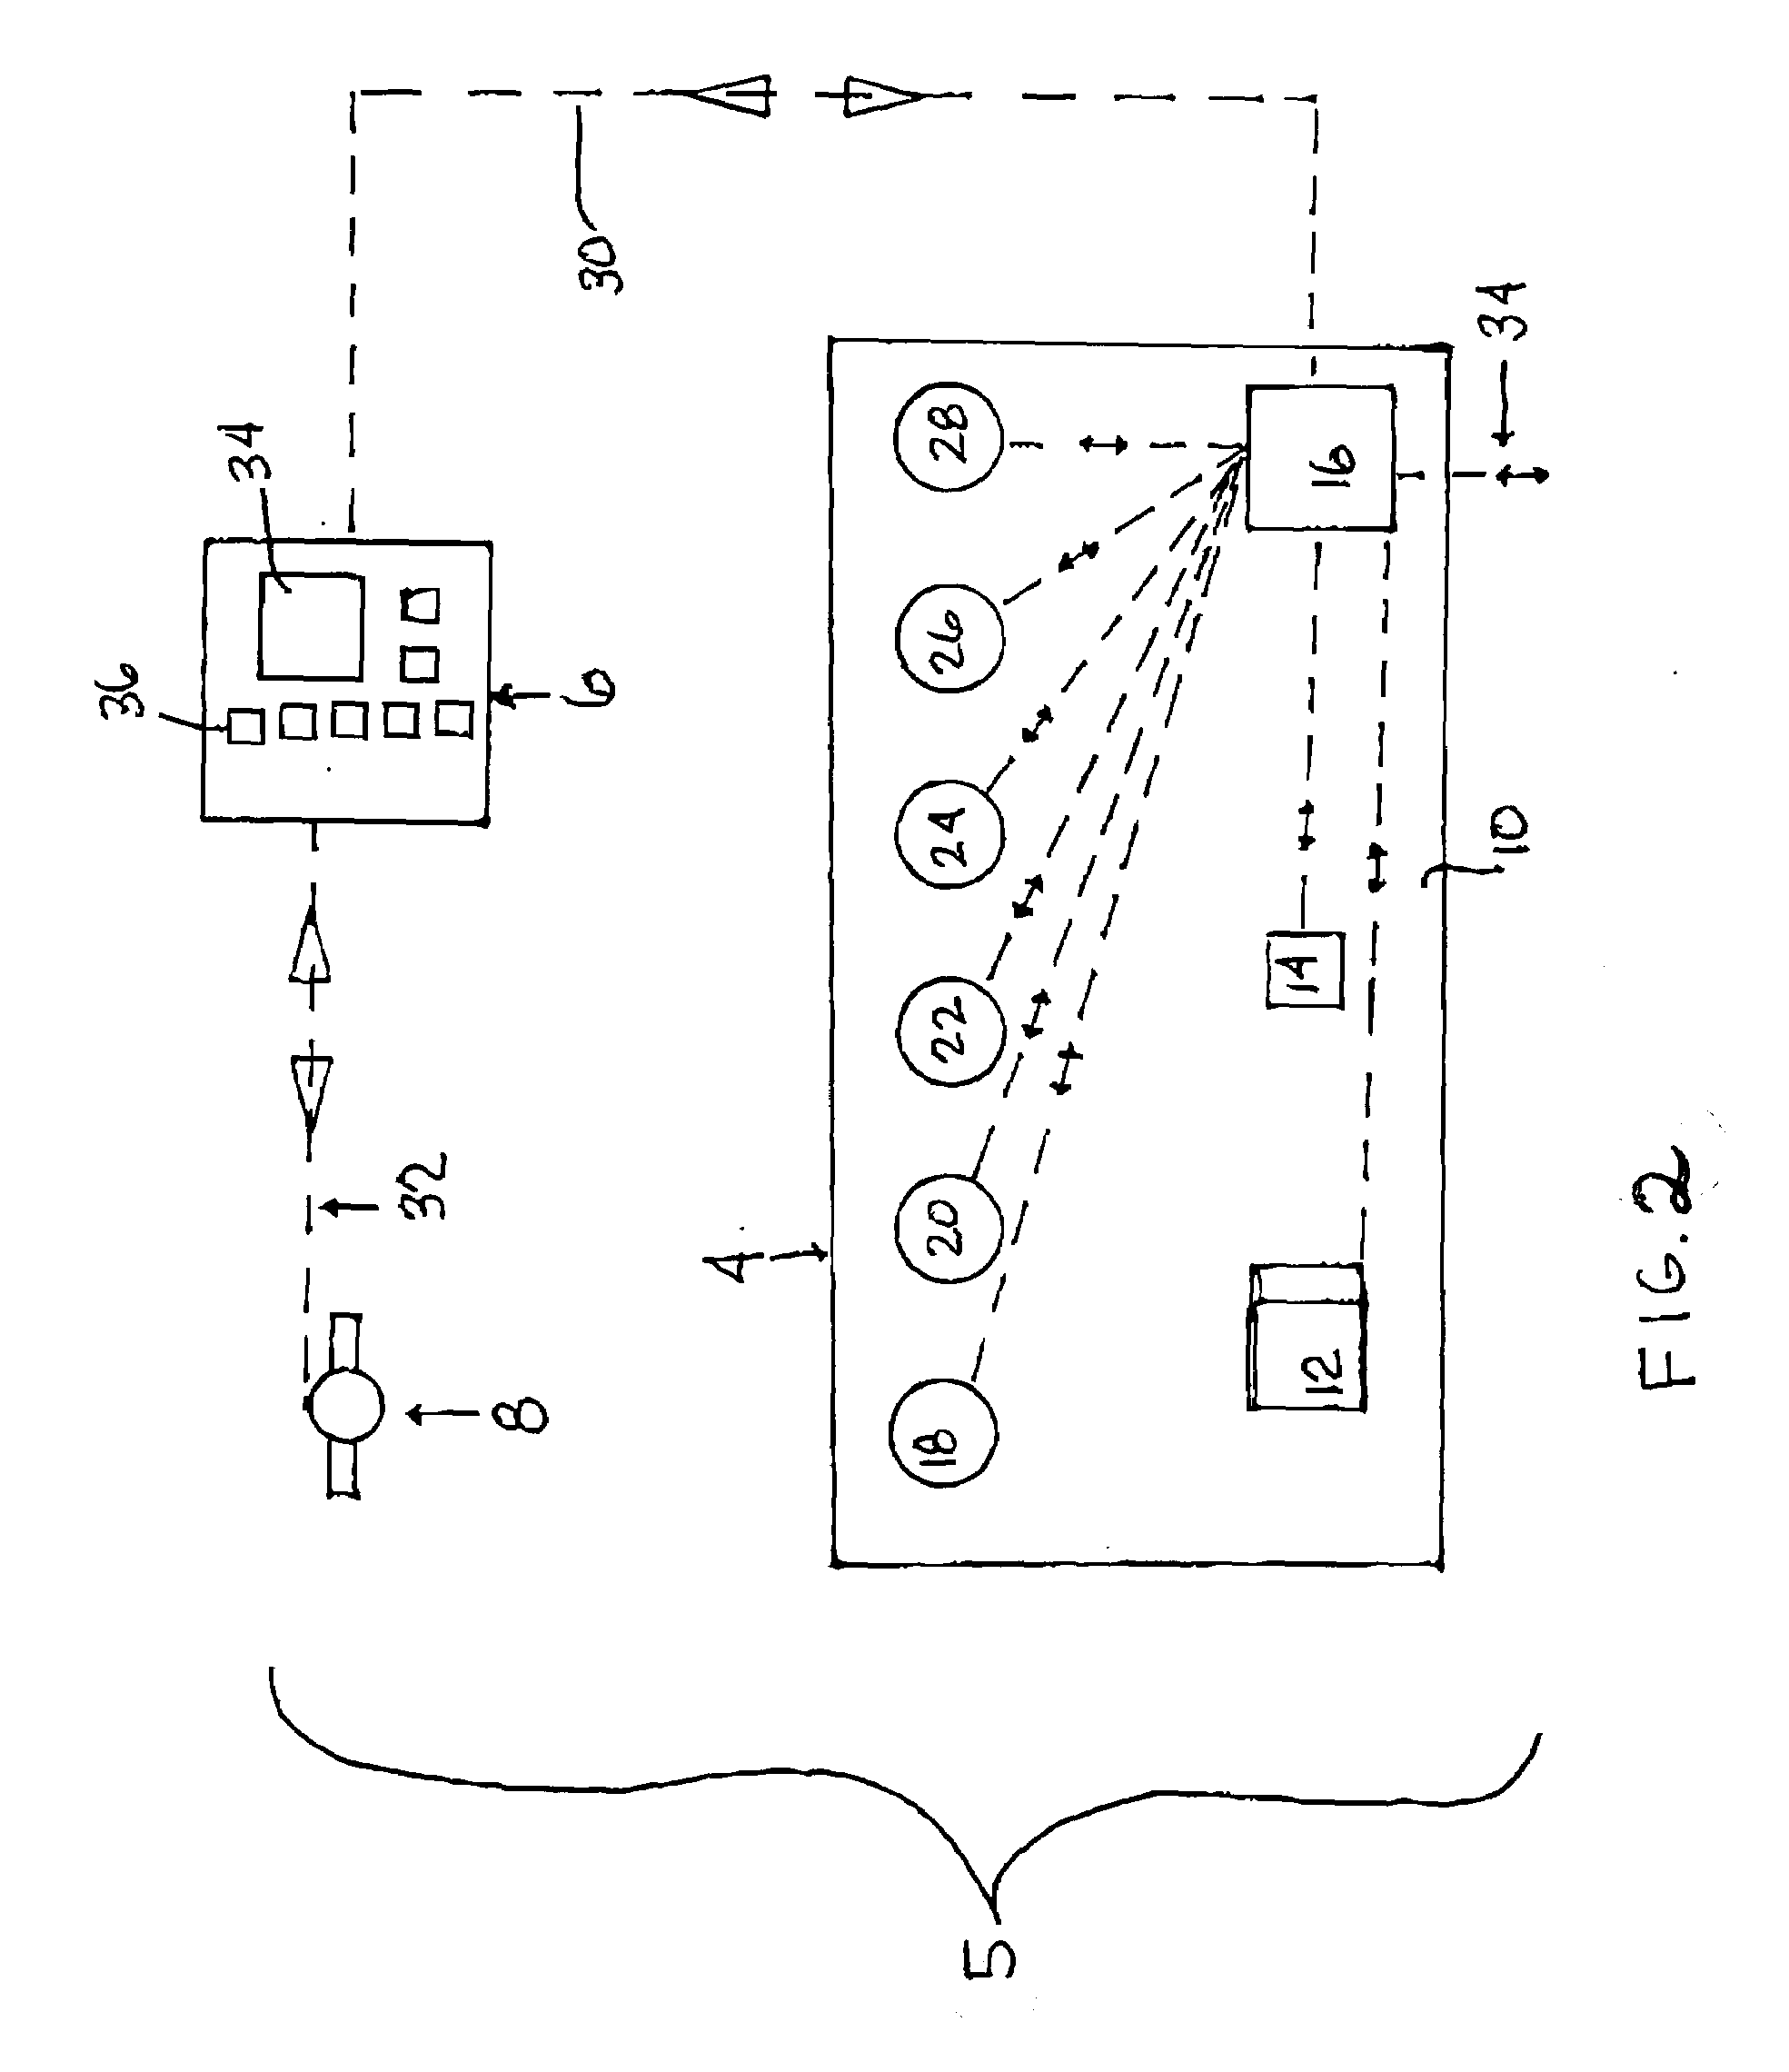 Security devices for implementing hand-held wagering